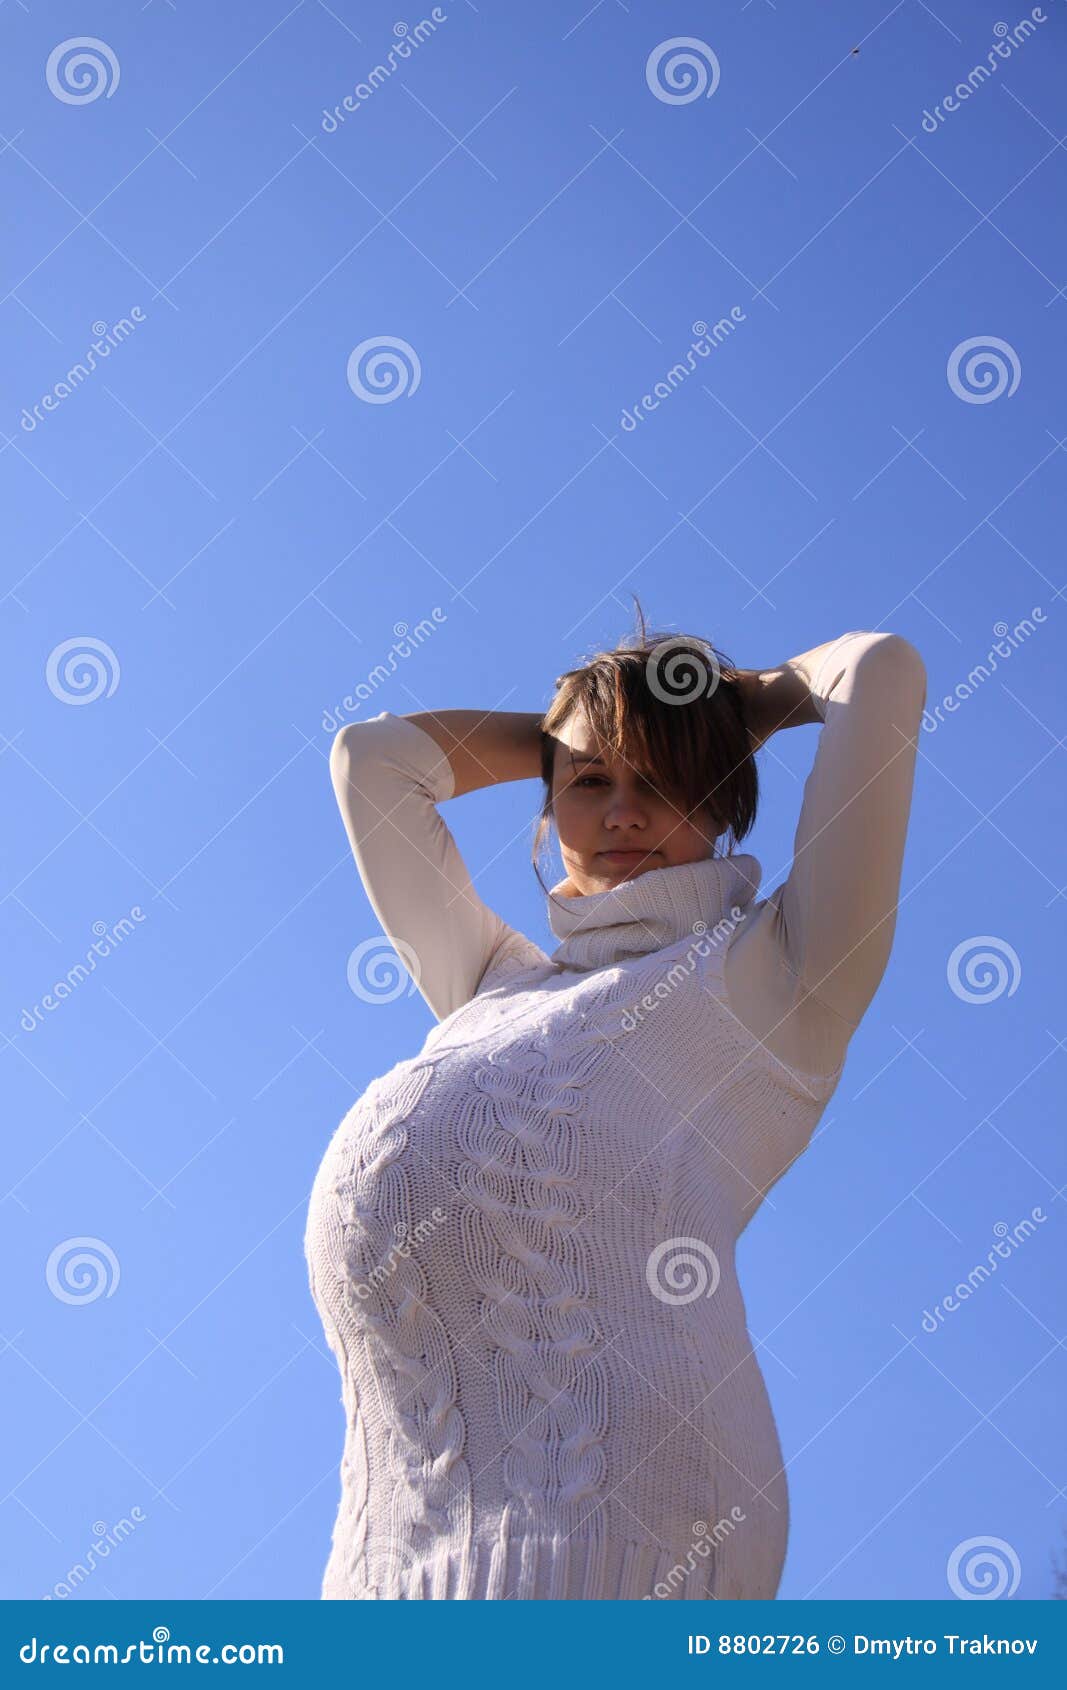 Pregnant girl against the sun. Pregnant girl in a white sweater with high collar holding hands behind the head on a blue sky background against the sun